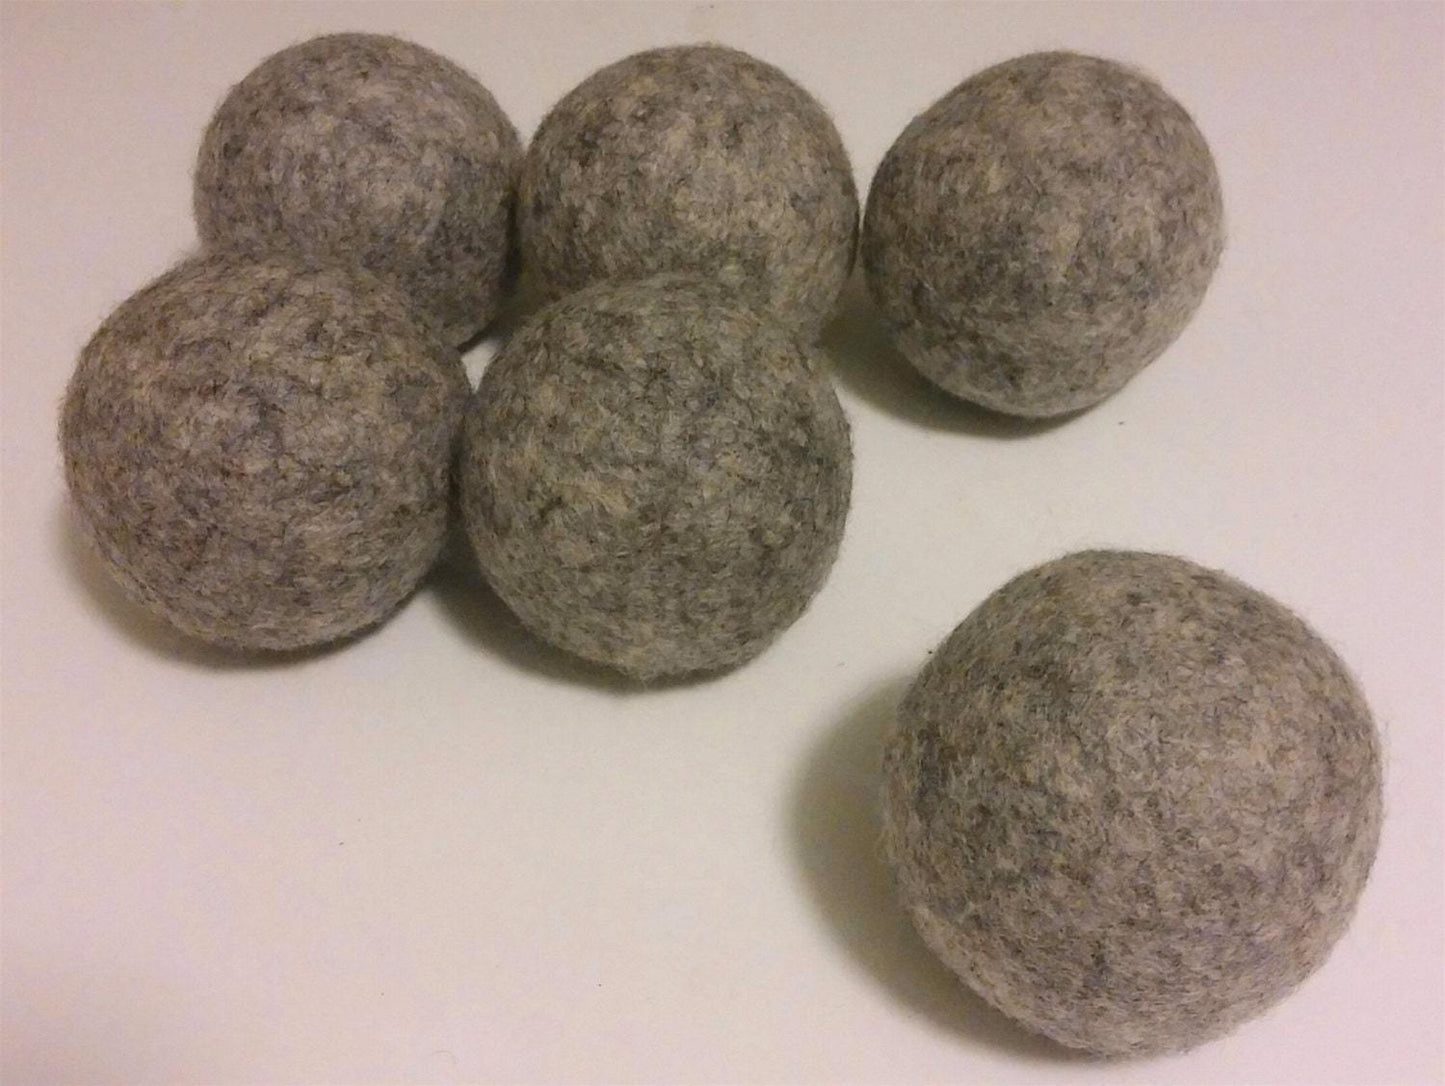 SALE!  Wholesale Co-op Bulk 300 Wool Dryer Balls White OR Gray Natural Laundry Softener - Gentle on your Laundry, Skin and Wallet